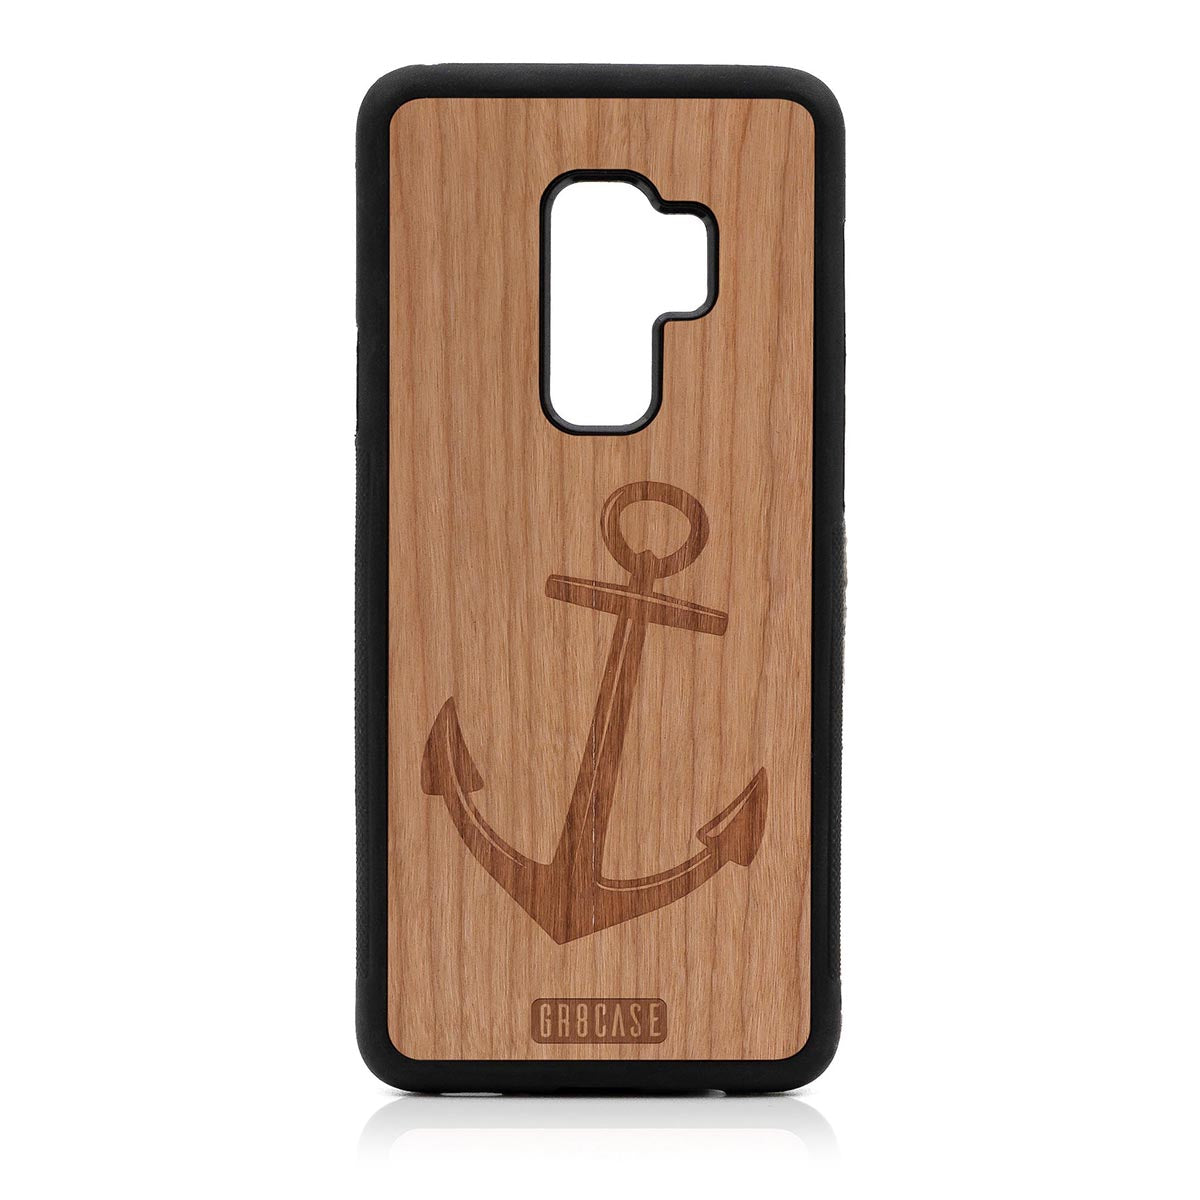 Anchor Design Wood Case For Samsung Galaxy S9 Plus by GR8CASE